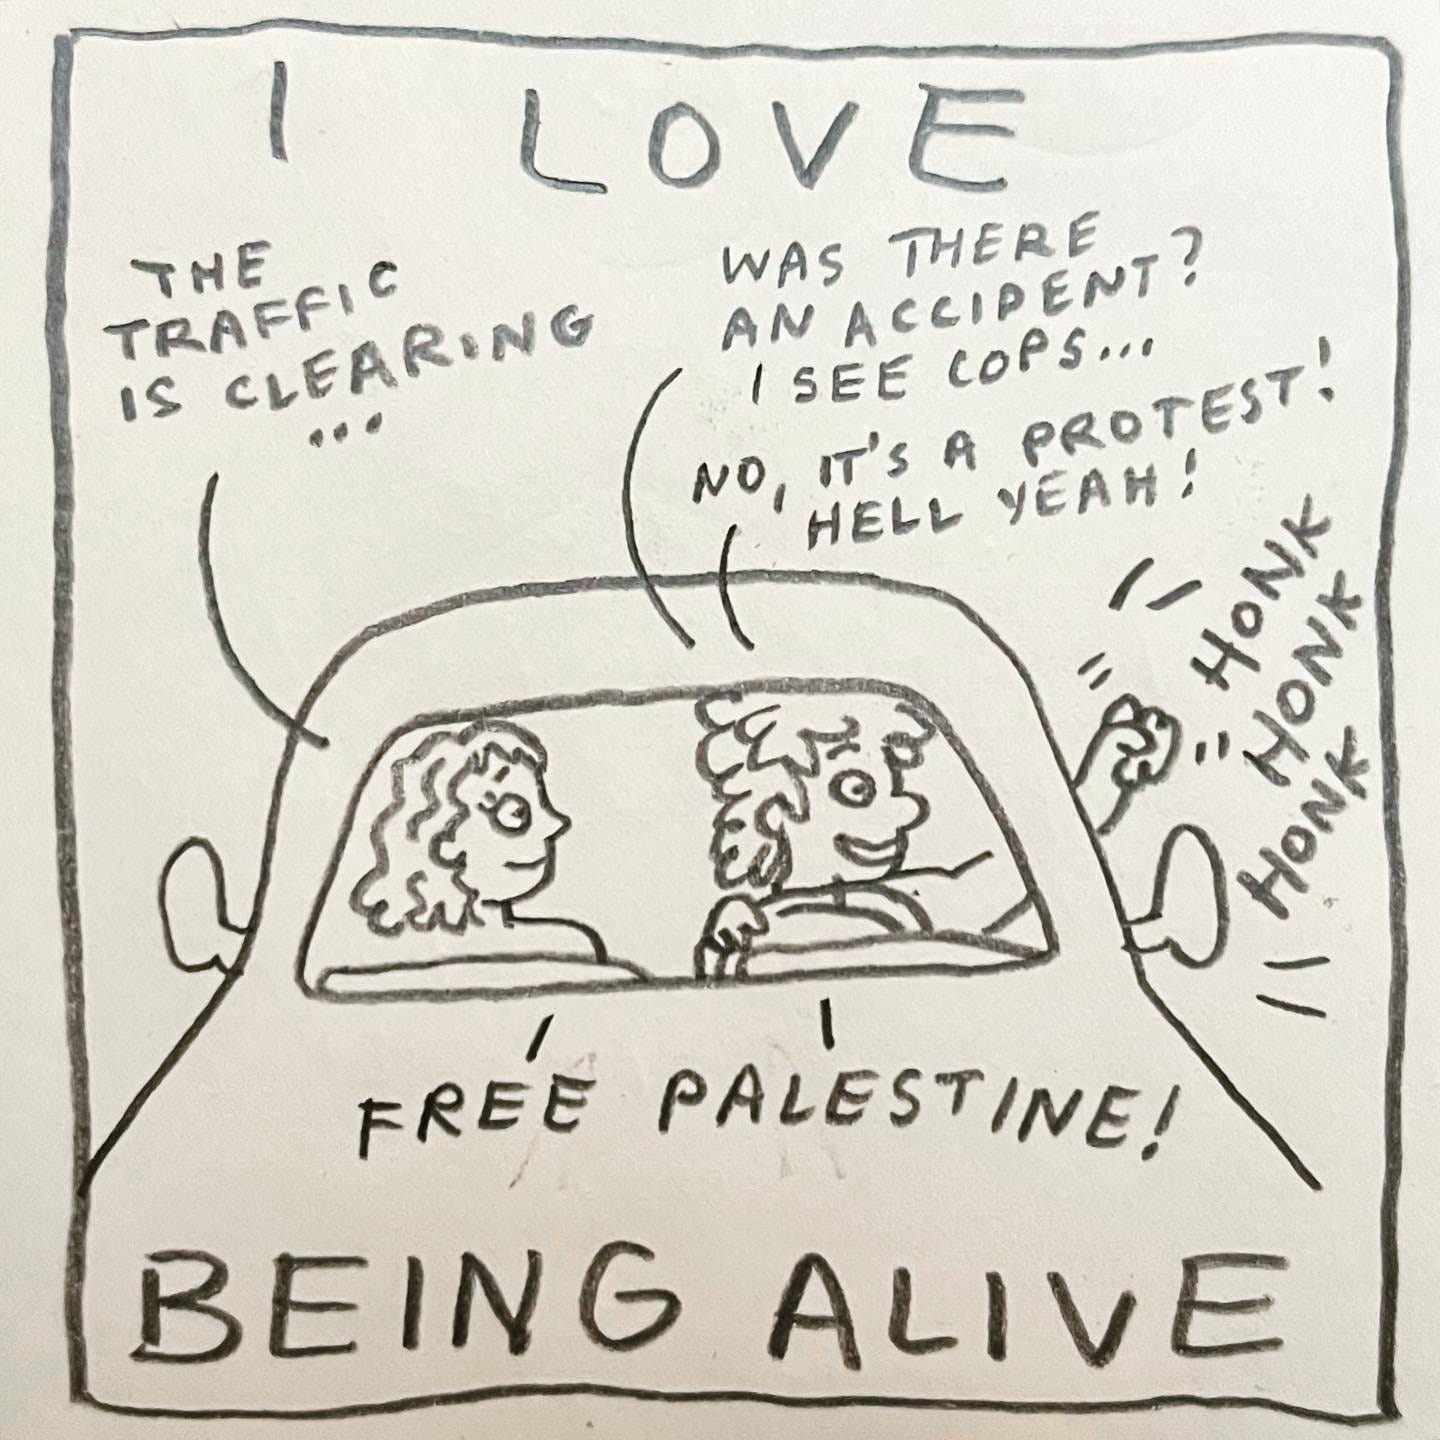 Panel 5: I love being alive Image: We see the front of a car, Lark in the driver's seat and their lover in the passenger seat. She observes, "the traffic is clearing…" as both of them are looking out the driver side window. Lark says, "was there an accident? I see cops… No, it's a protest! Hell yeah!" They raise their fist and shake it out the window, honking the car horn. "Honk! Honk! Honk!"